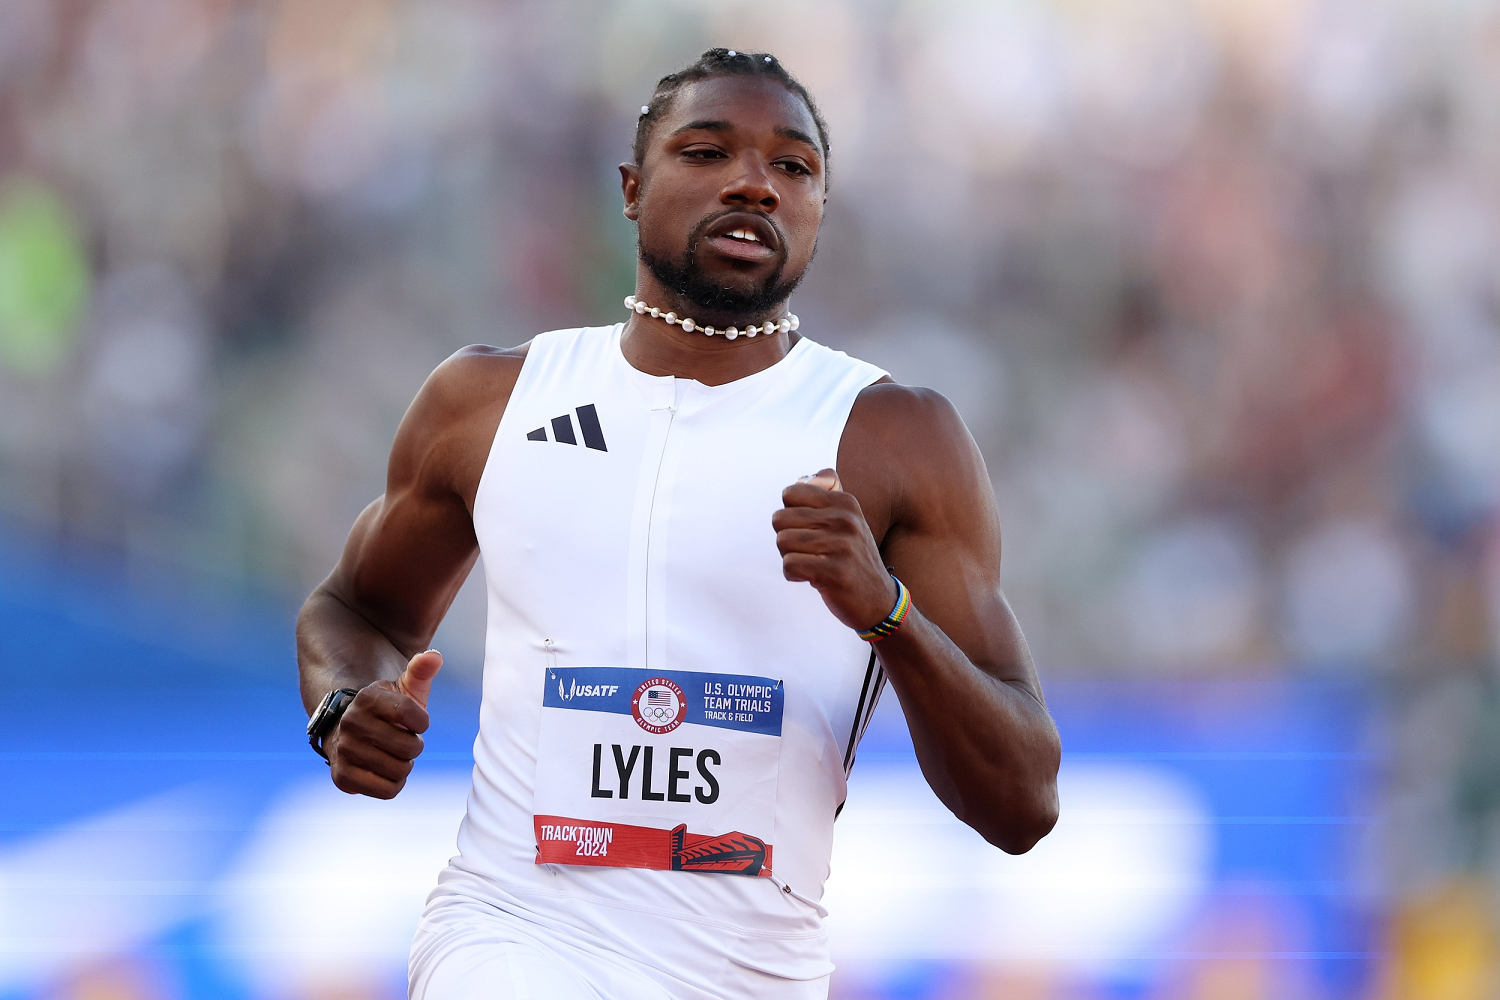 After falling short in 2020, Noah Lyles sets sights on 100-meter win at Olympic trials